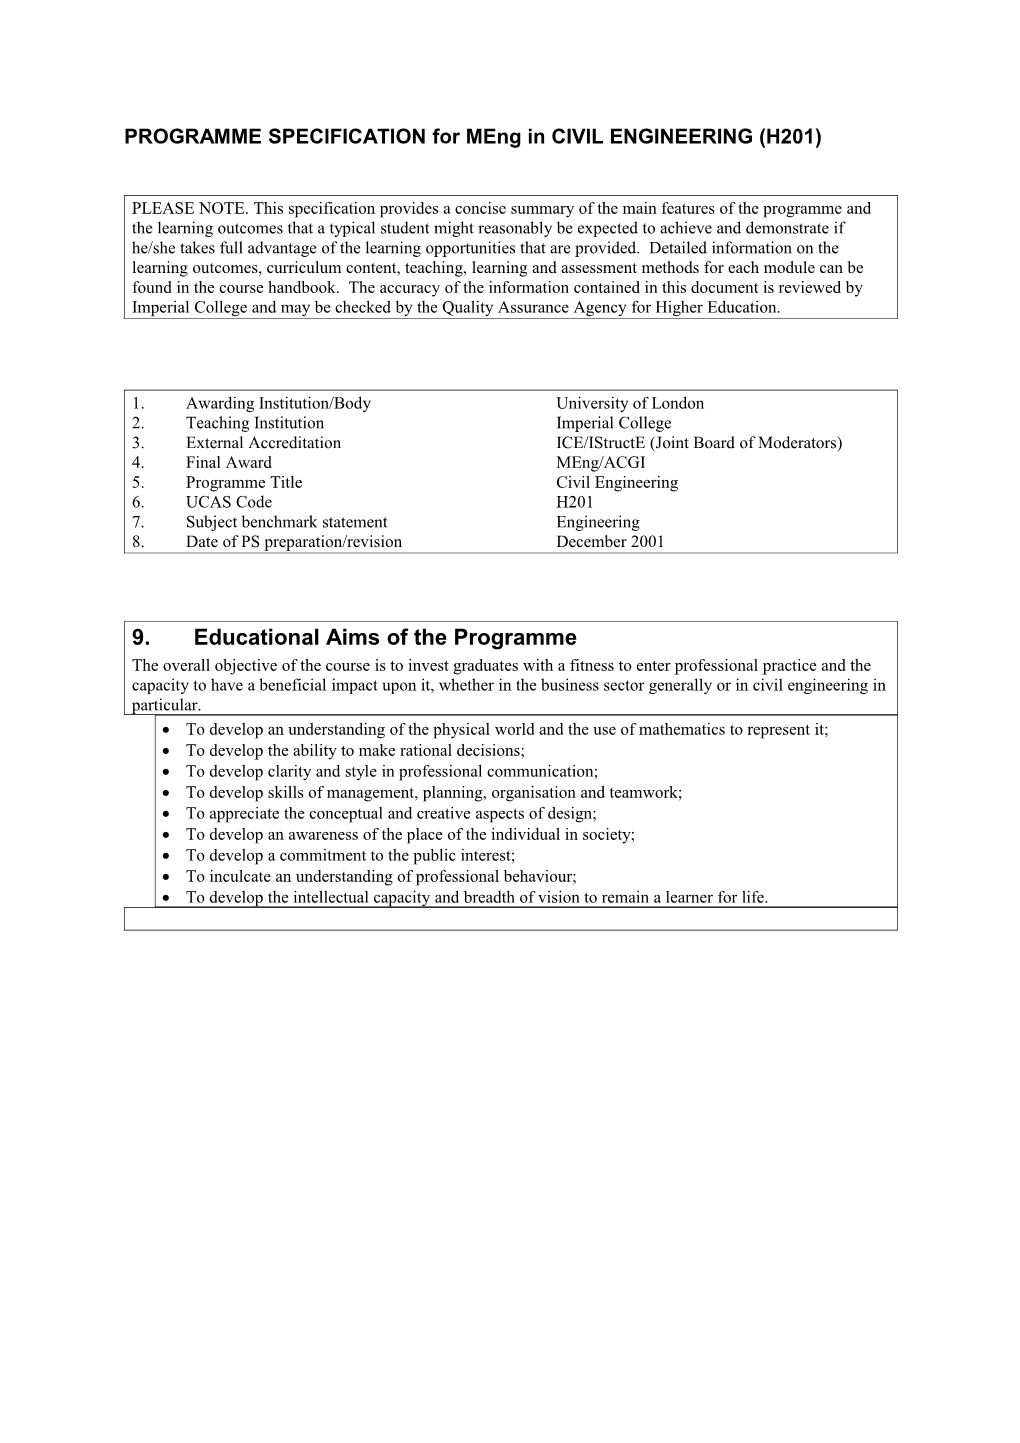 PROGRAMME SPECIFICATION for Meng in CIVIL ENGINEERING (H201)